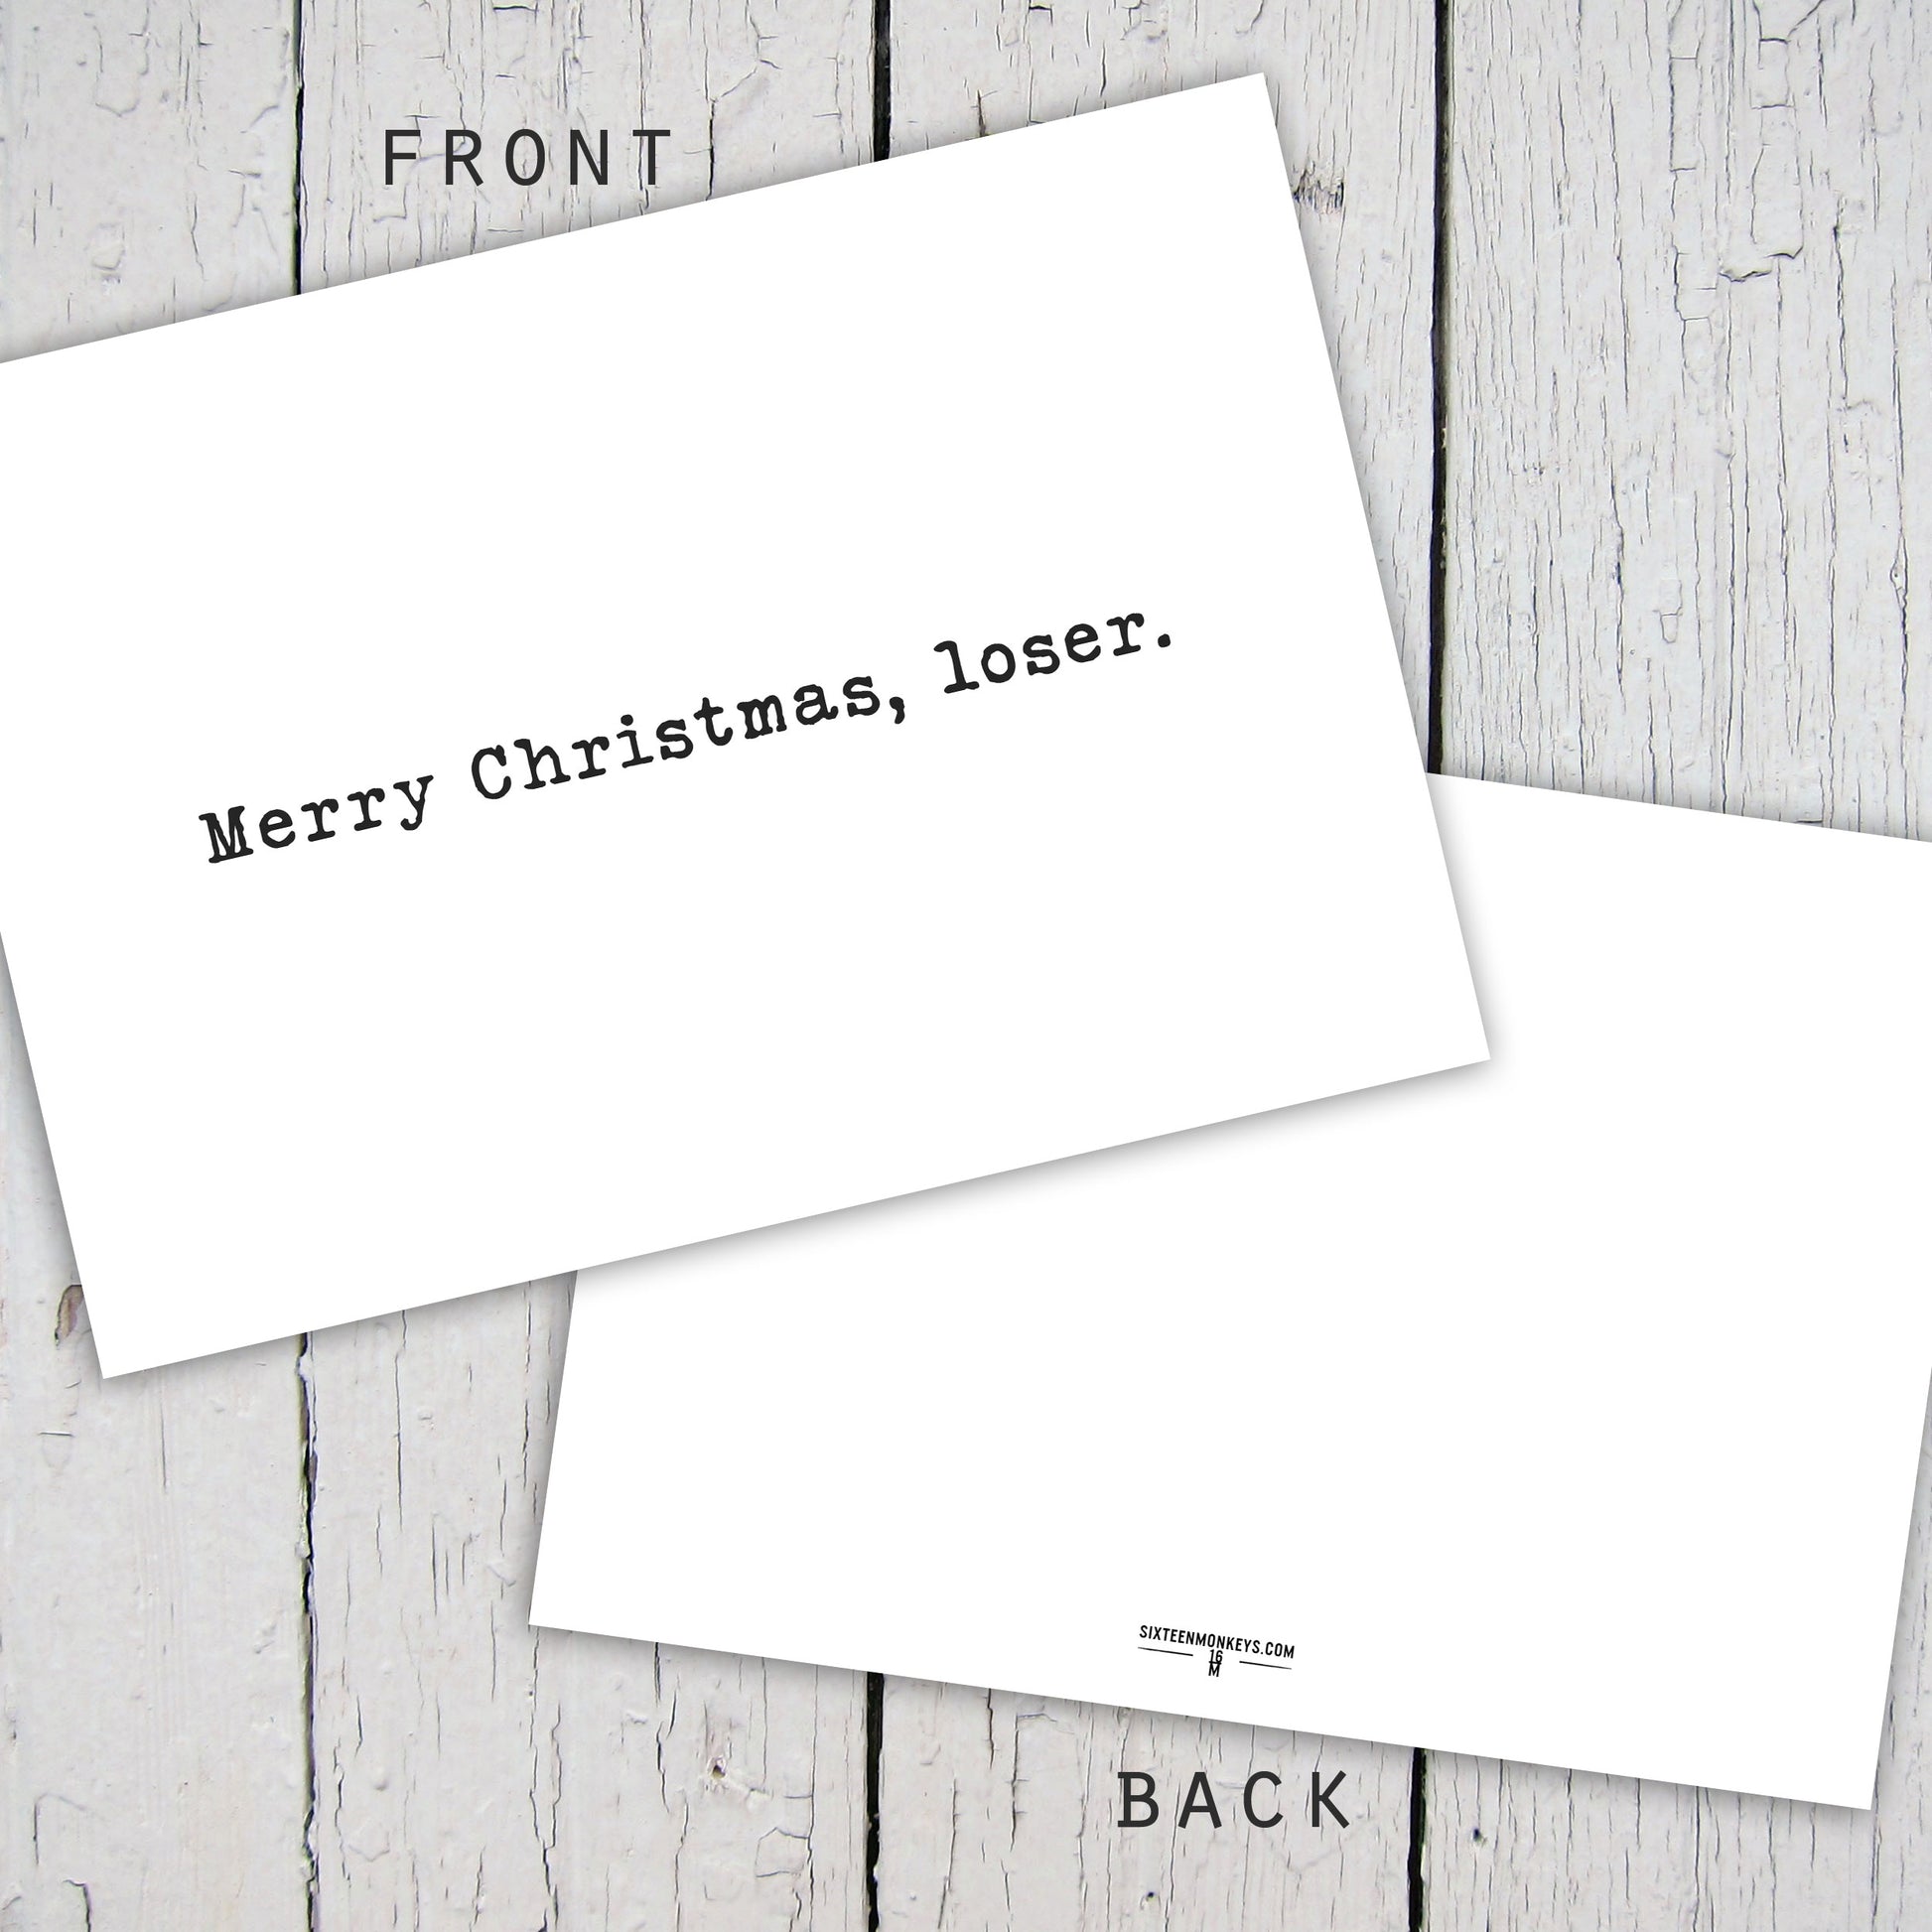 ‘Merry Christmas, Loser’ Card